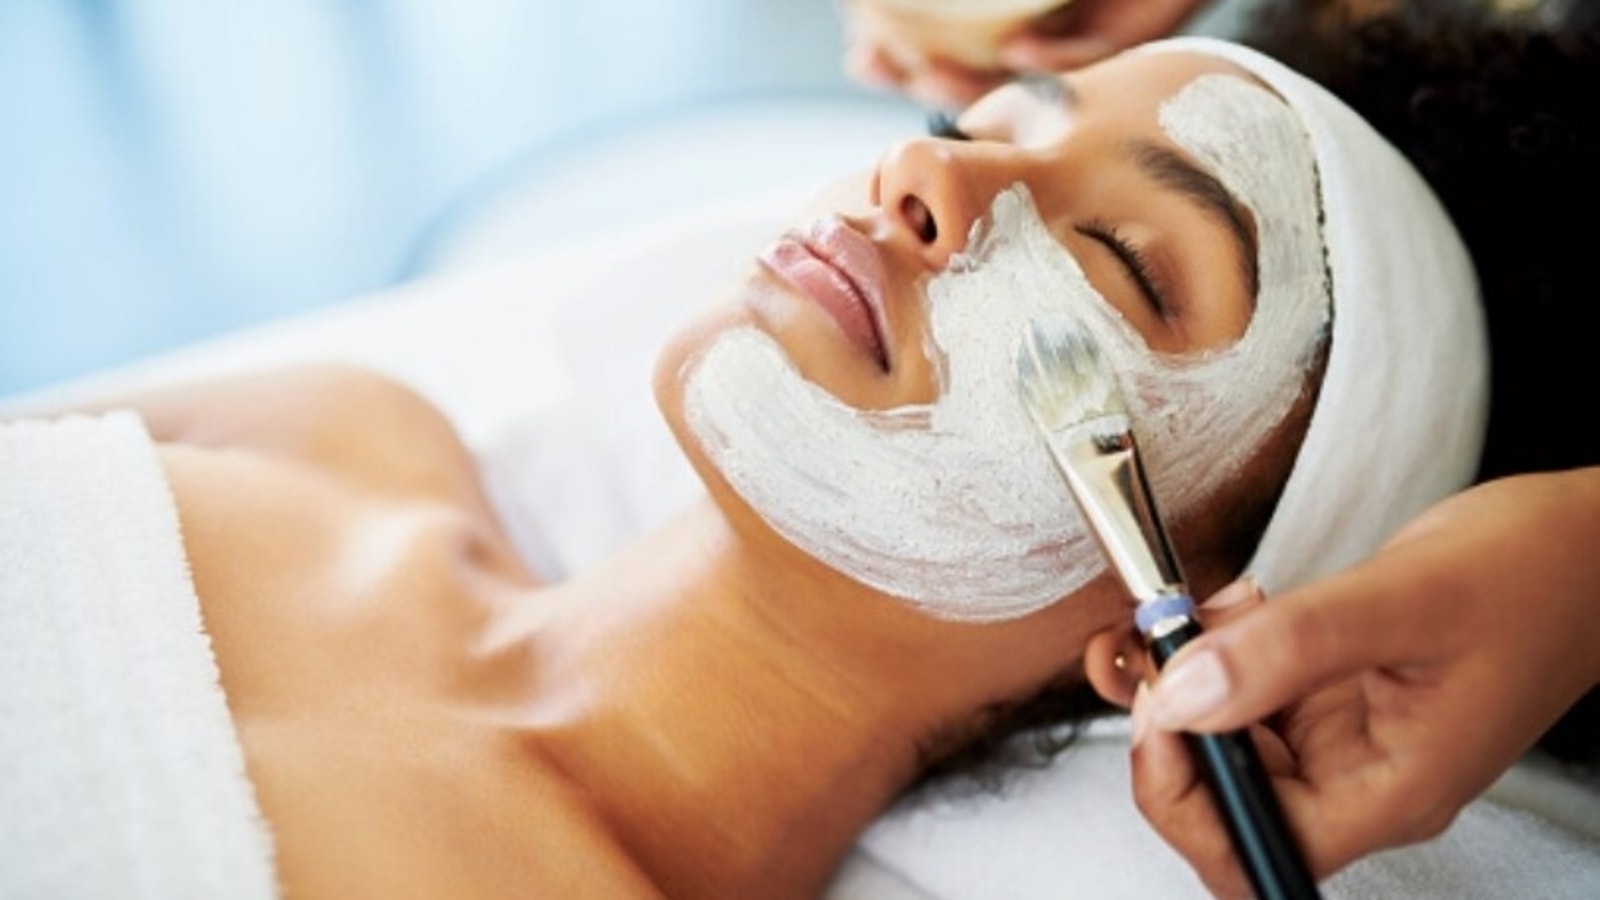 What is chemical peel? How does it benefit the skin?